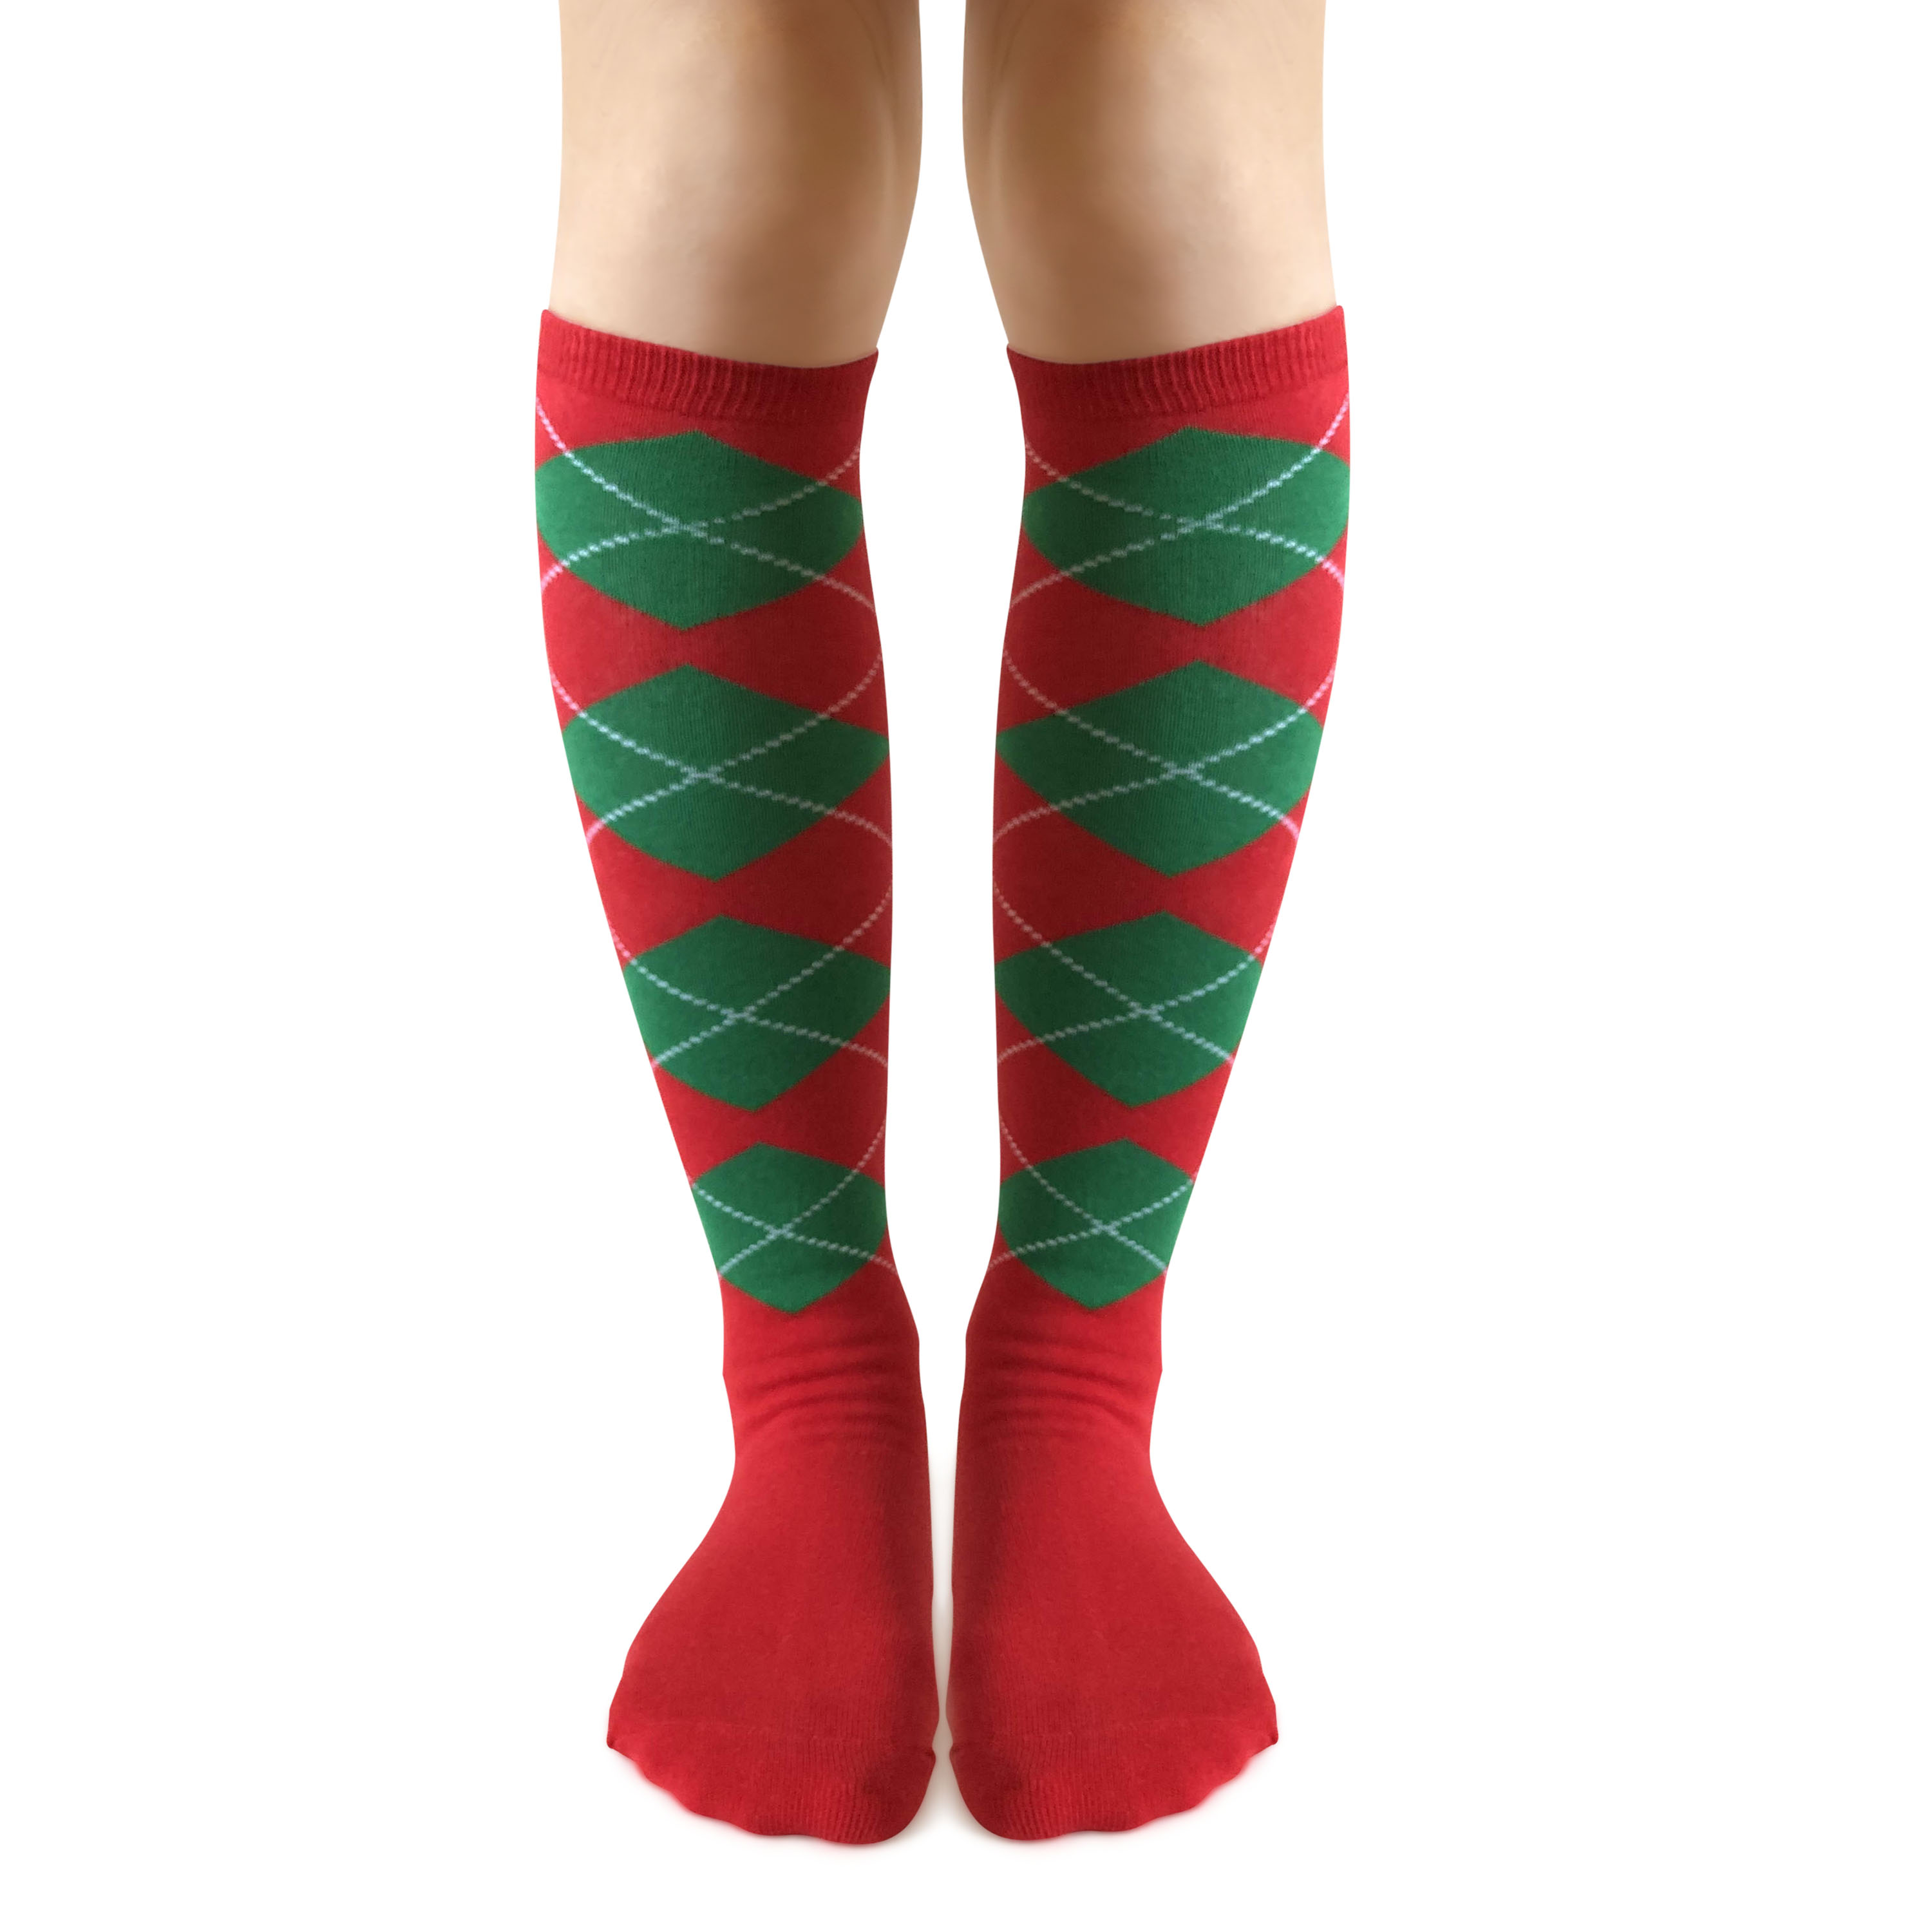 Green Red Argyle Knee High Socks(Great to wear during Christmas)